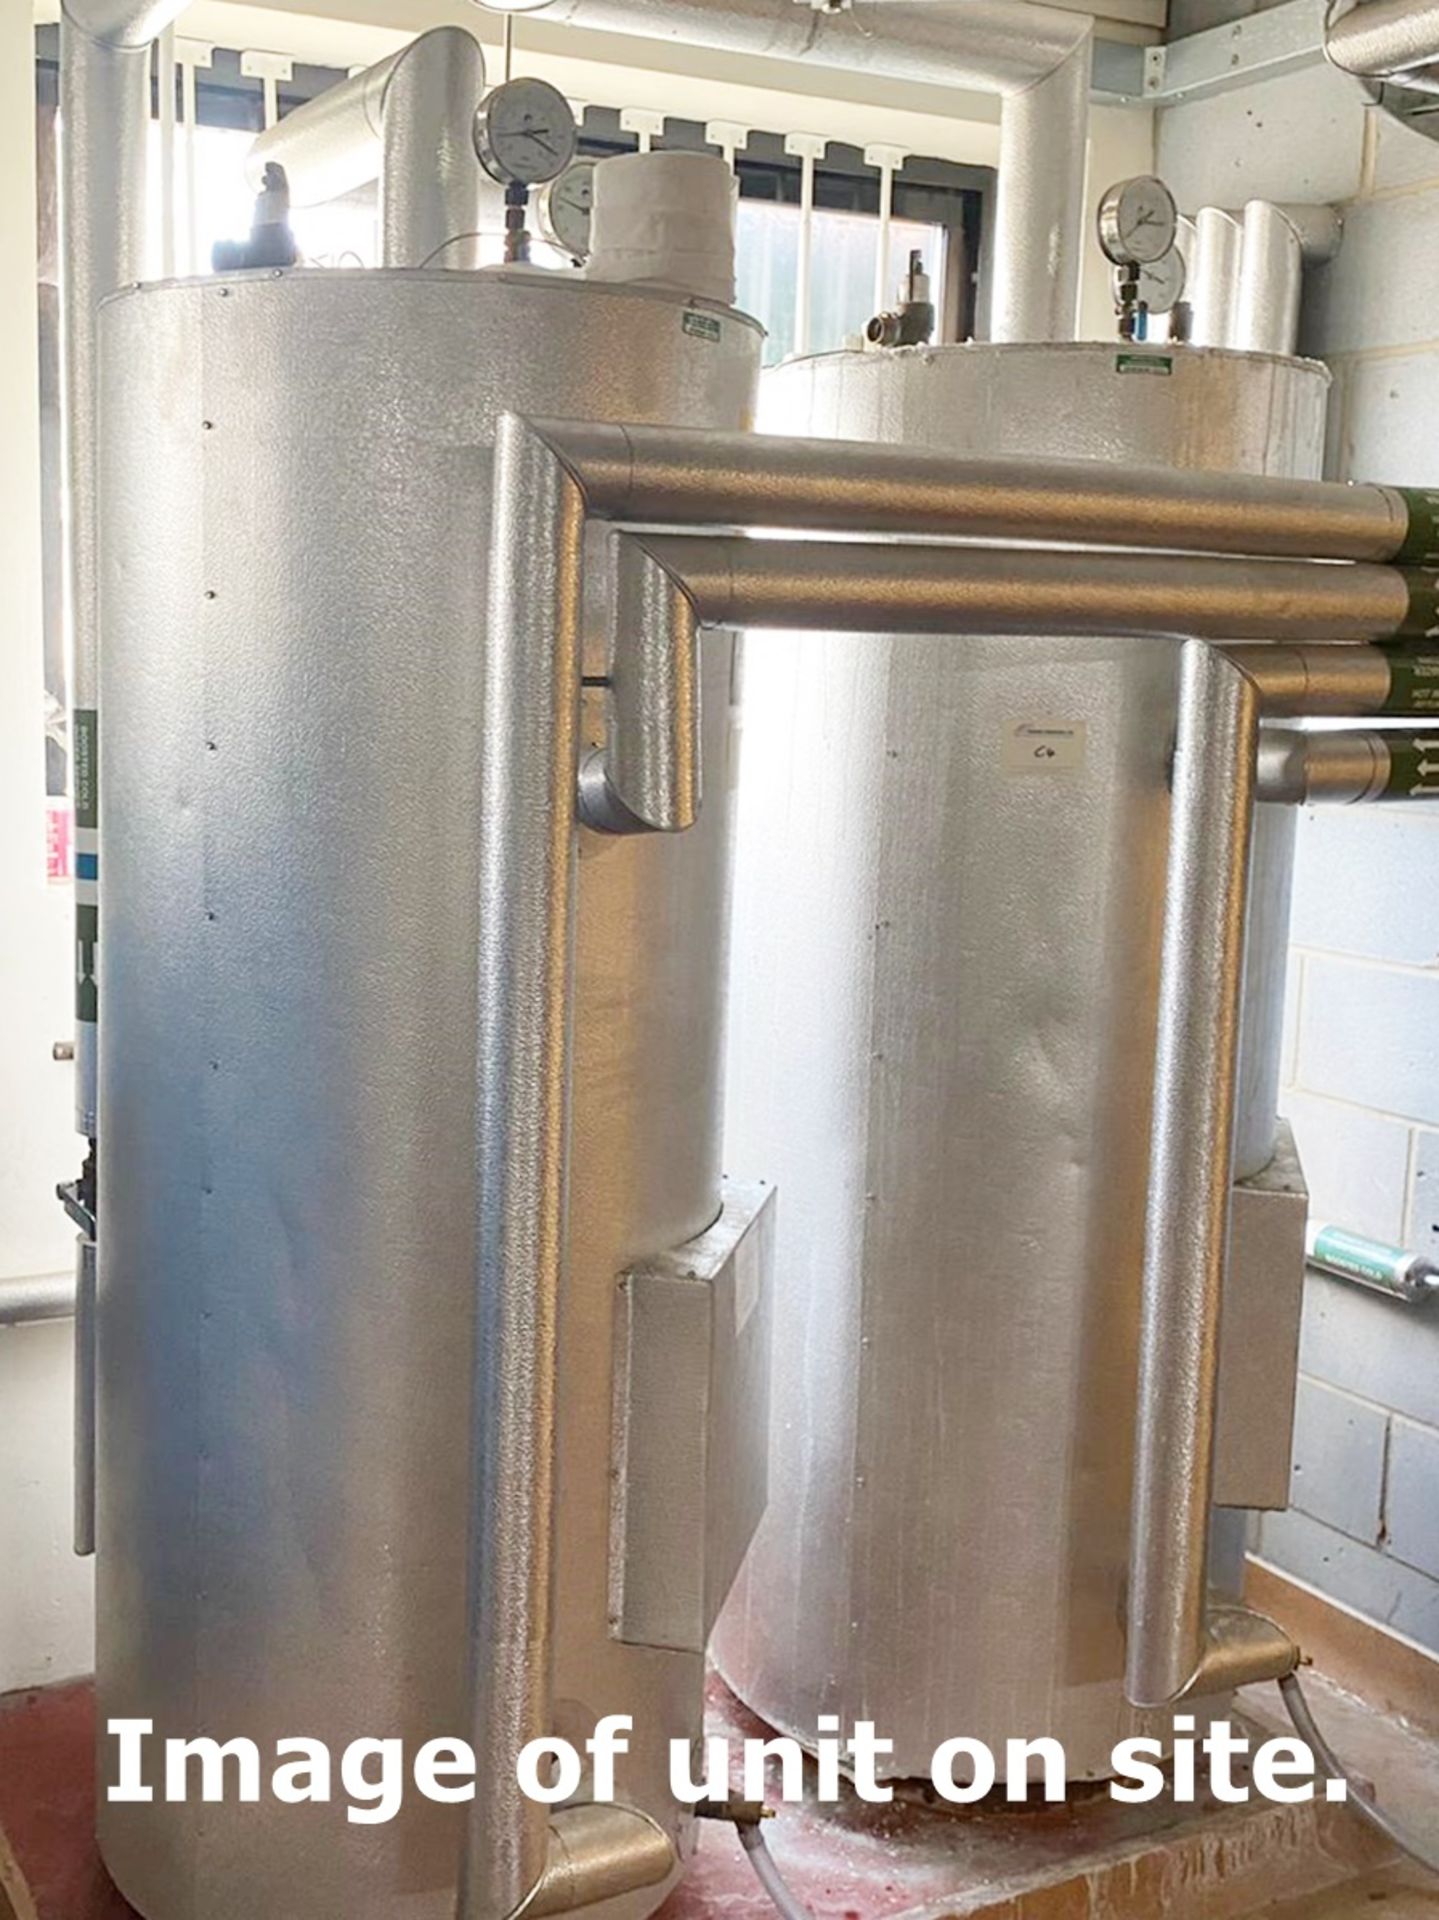 Large Quantity of Thermal Pipe Covering Contents of Two Upright Cabinets - Cabinets Not Included - - Image 10 of 10